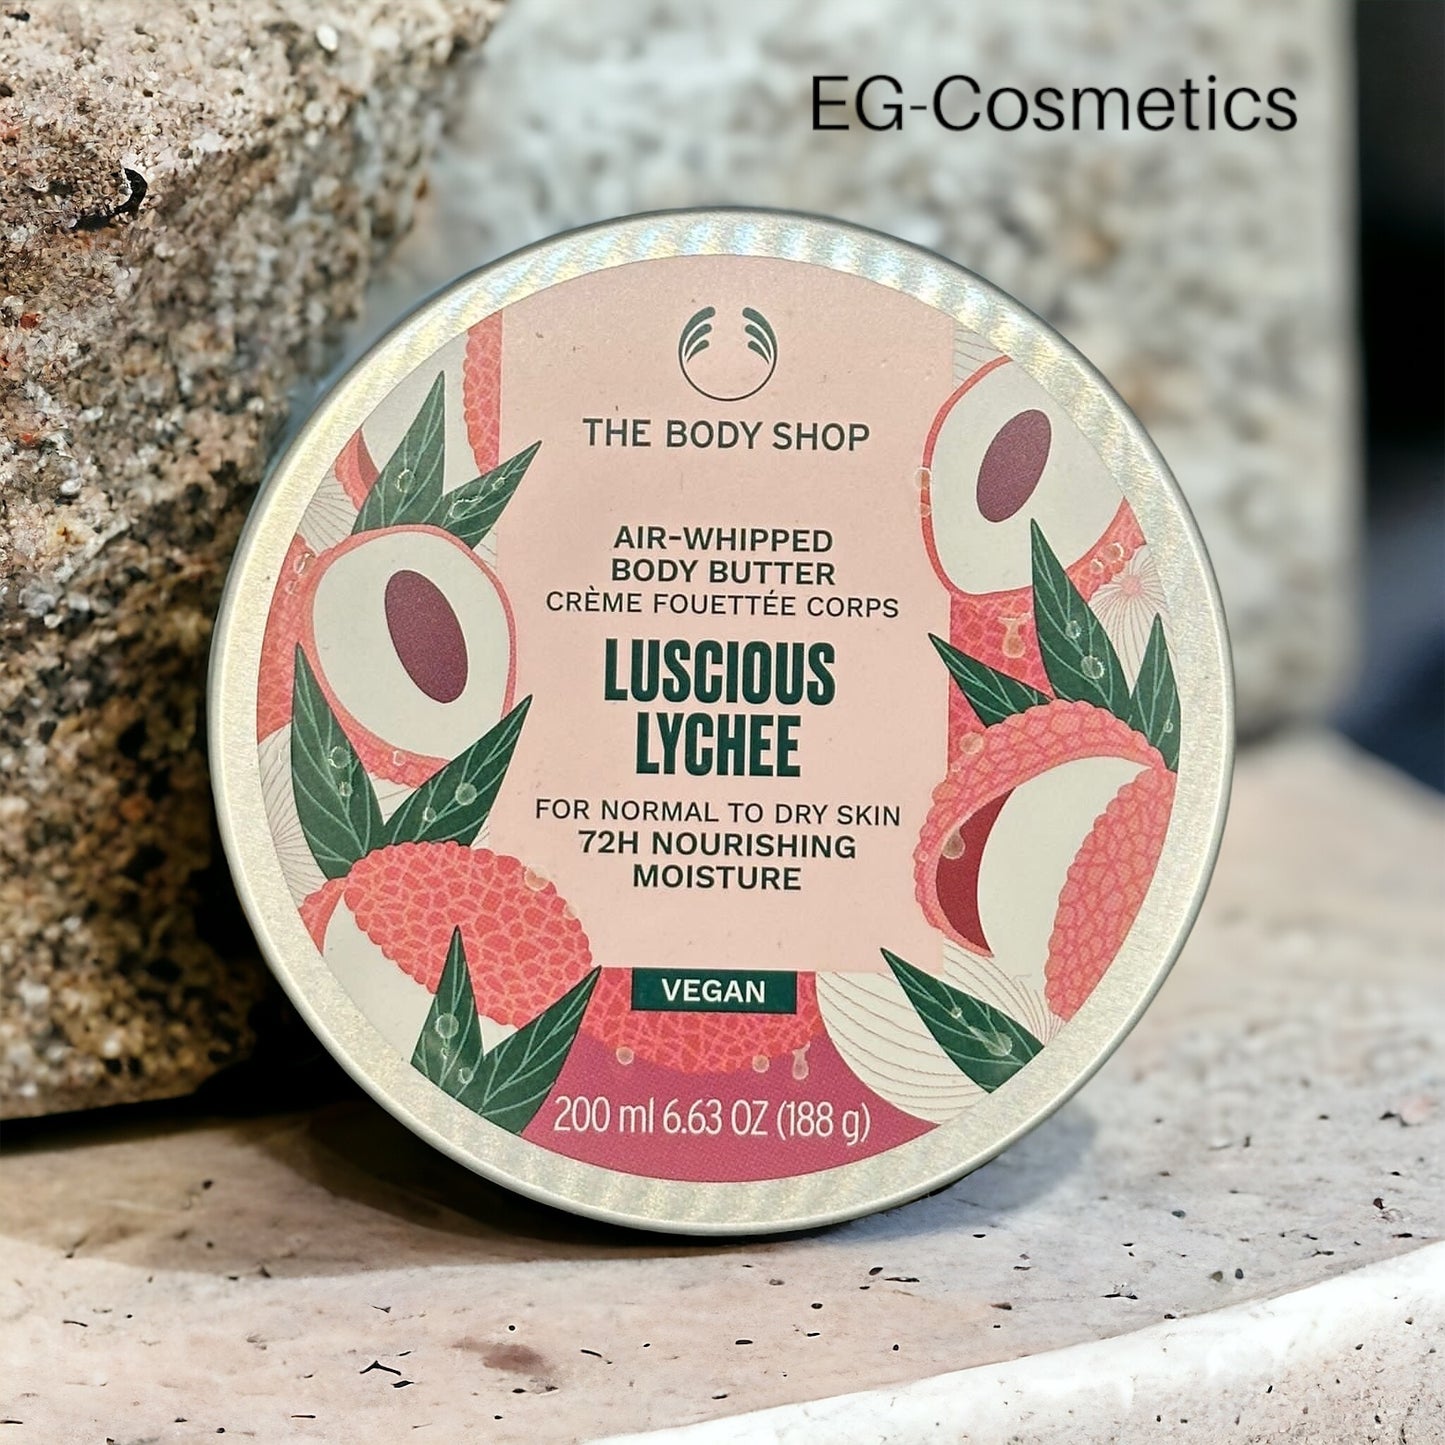 The Body Shop Luscious Lychee Body Butter 200ml